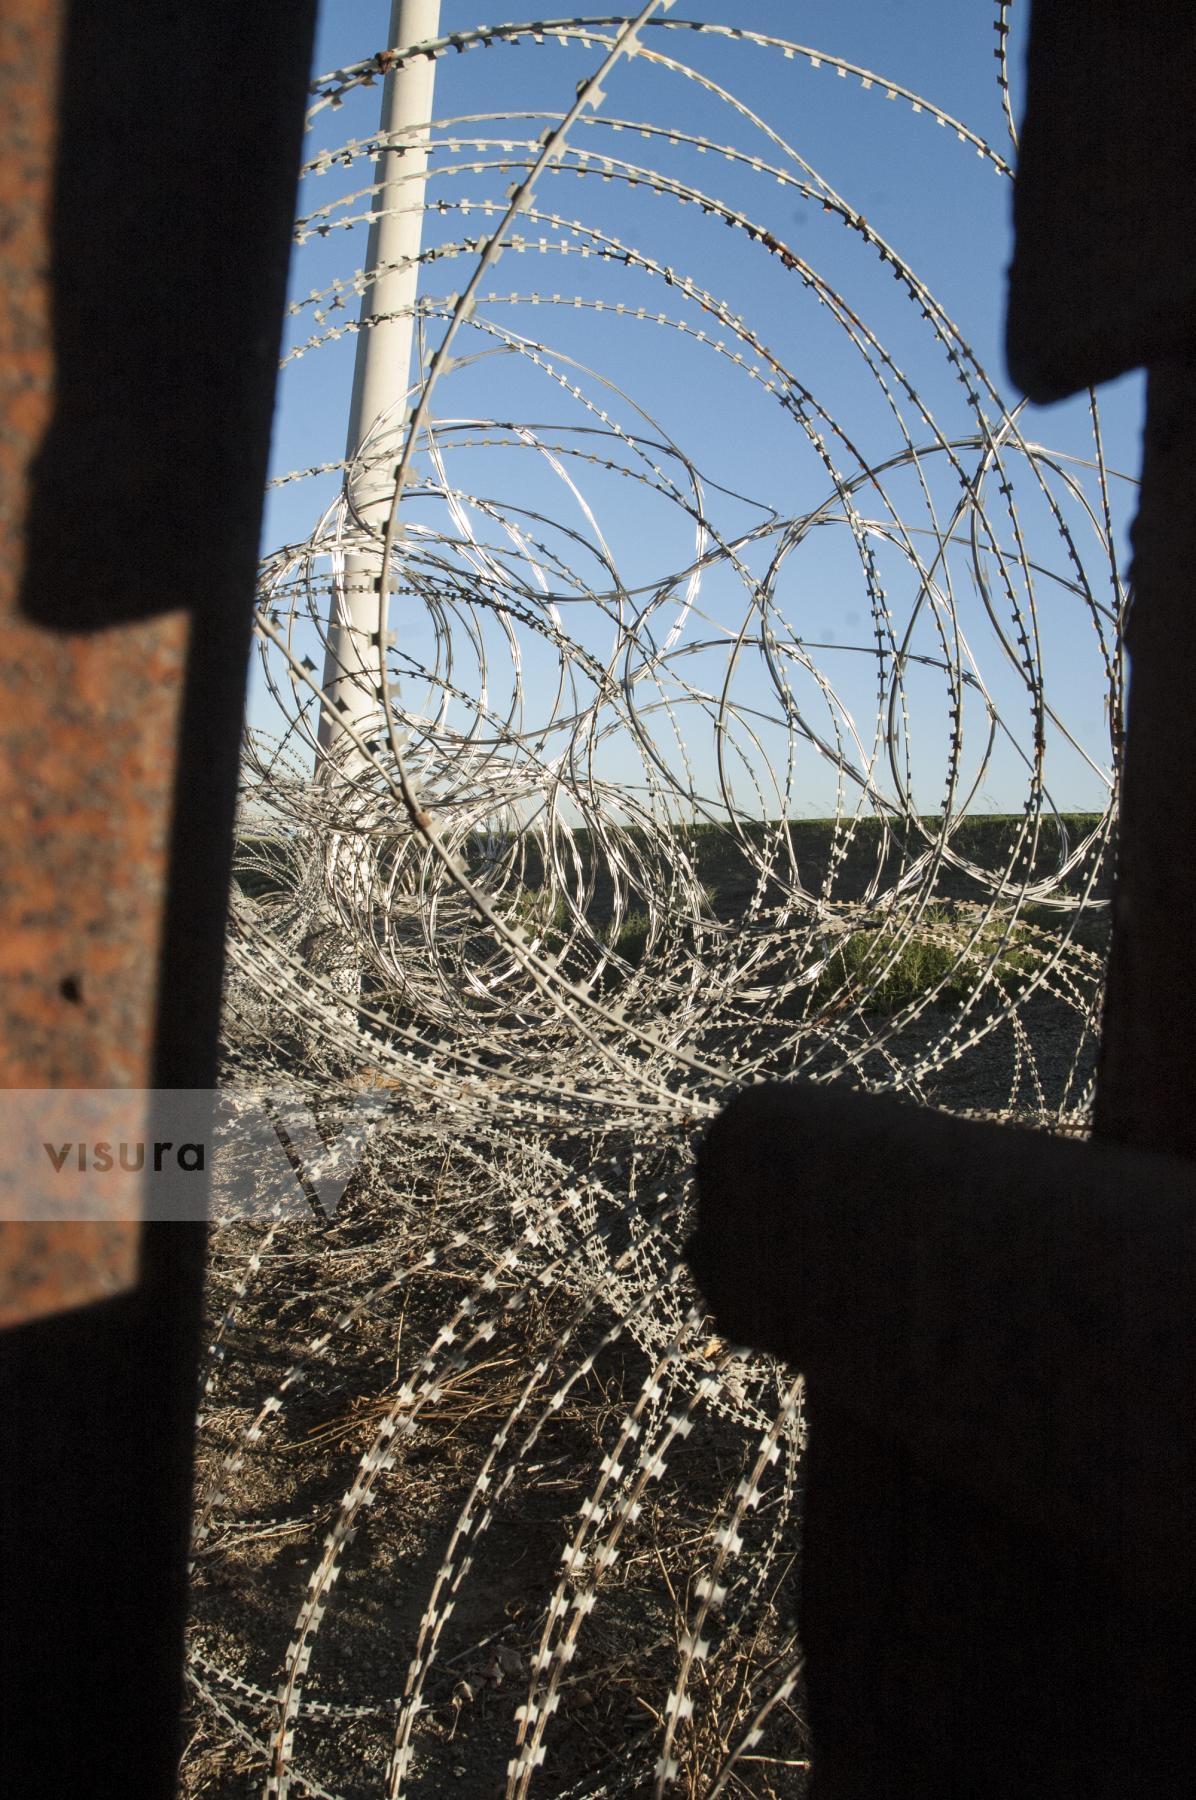 Purchase Razor wire entry into the U.S. by Tish Lampert